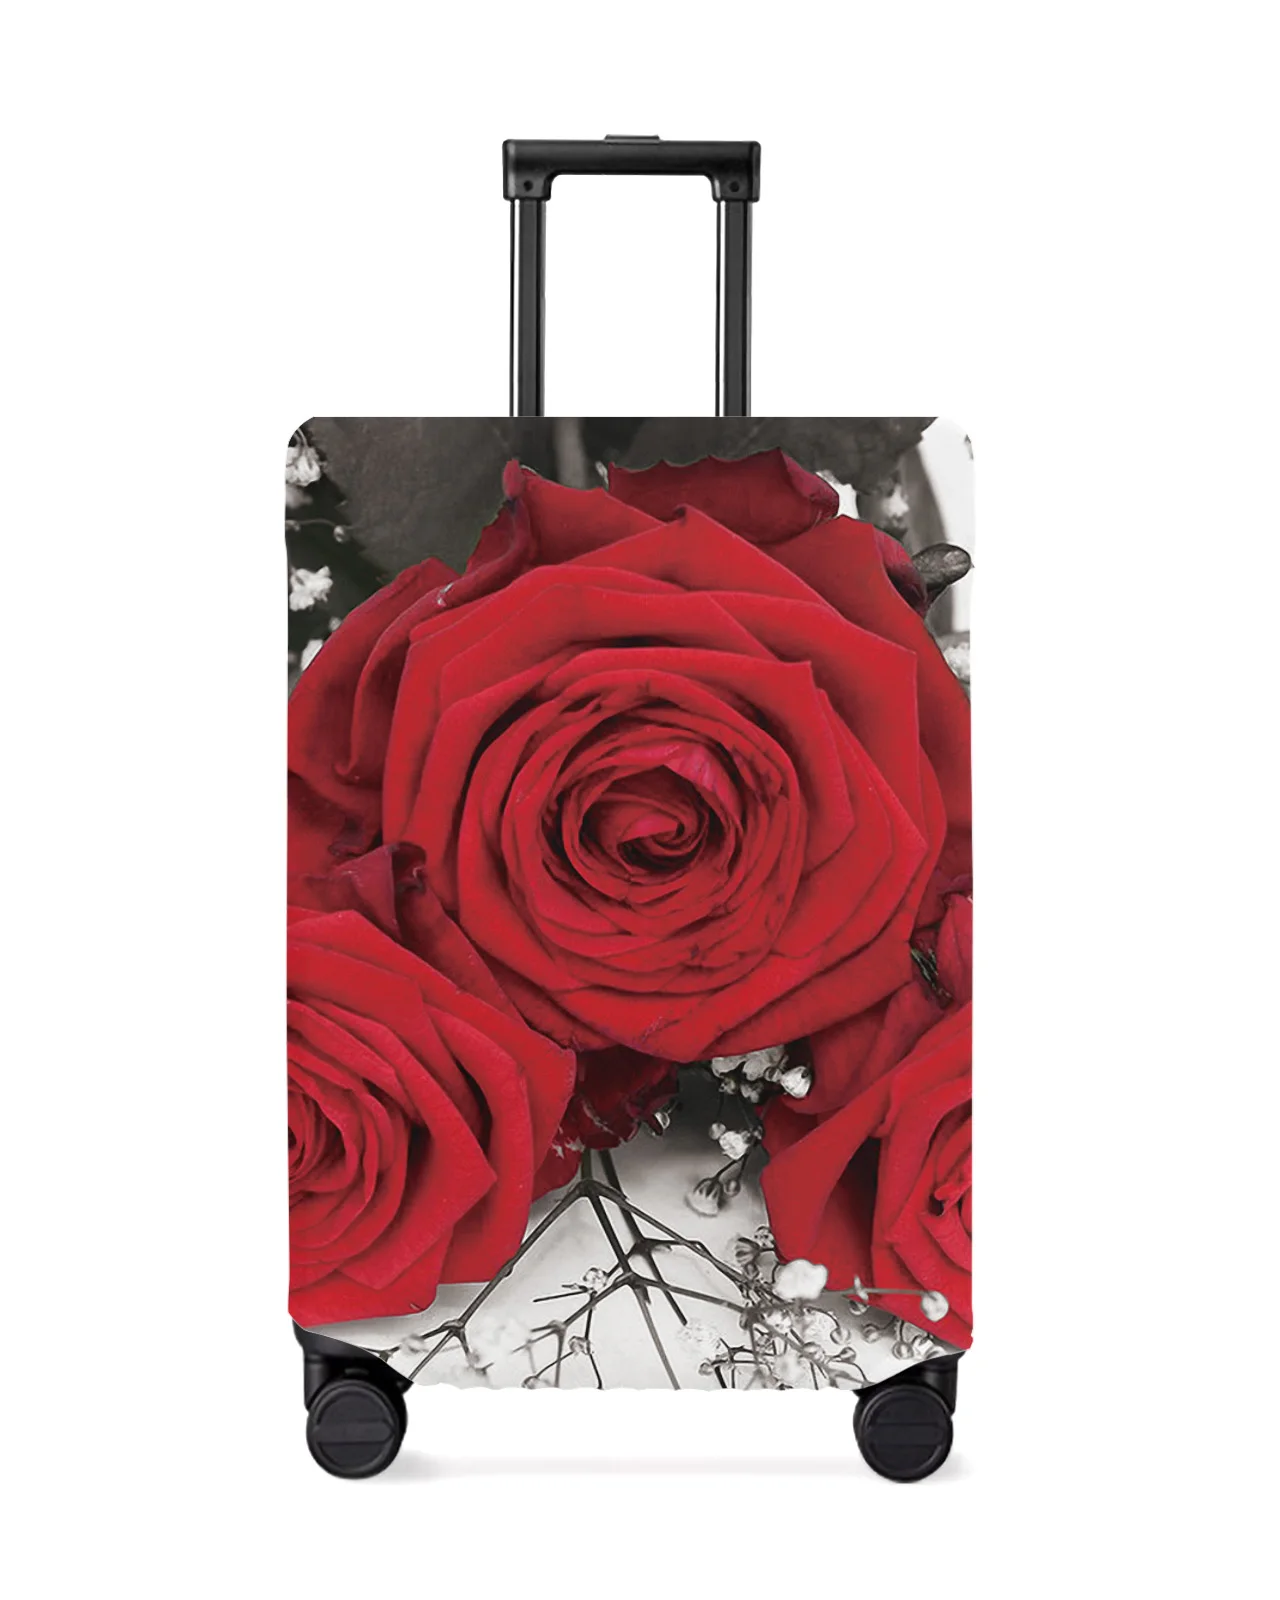 red-rose-flower-vintage-travel-luggage-protective-cover-for-travel-accessories-suitcase-elastic-dust-case-protect-sleeve